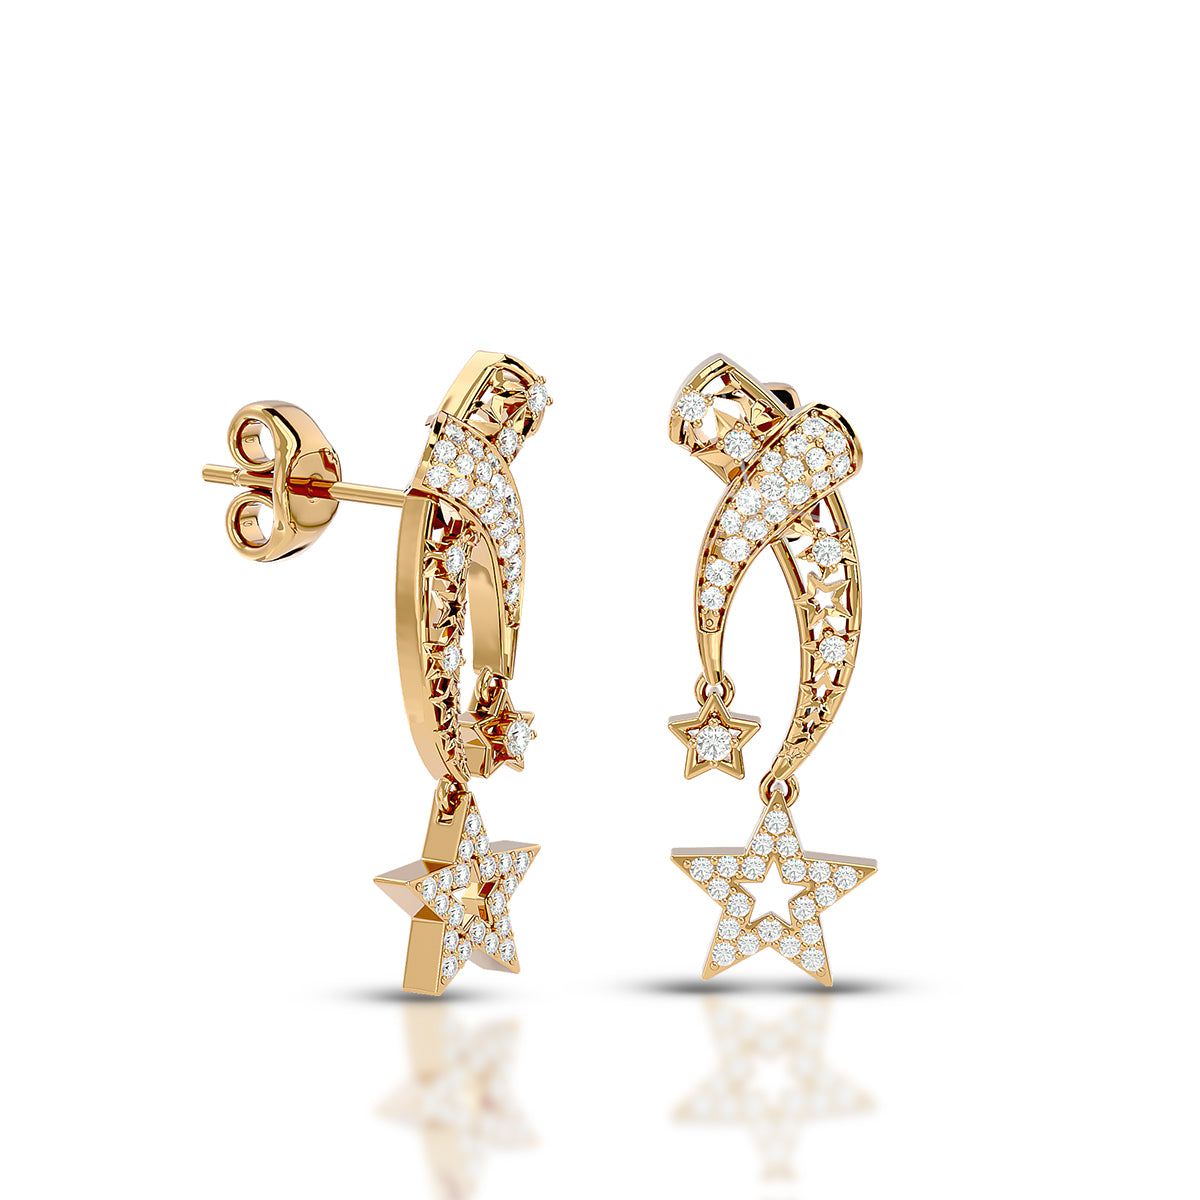 Connection Earrings Gold With Diamonds